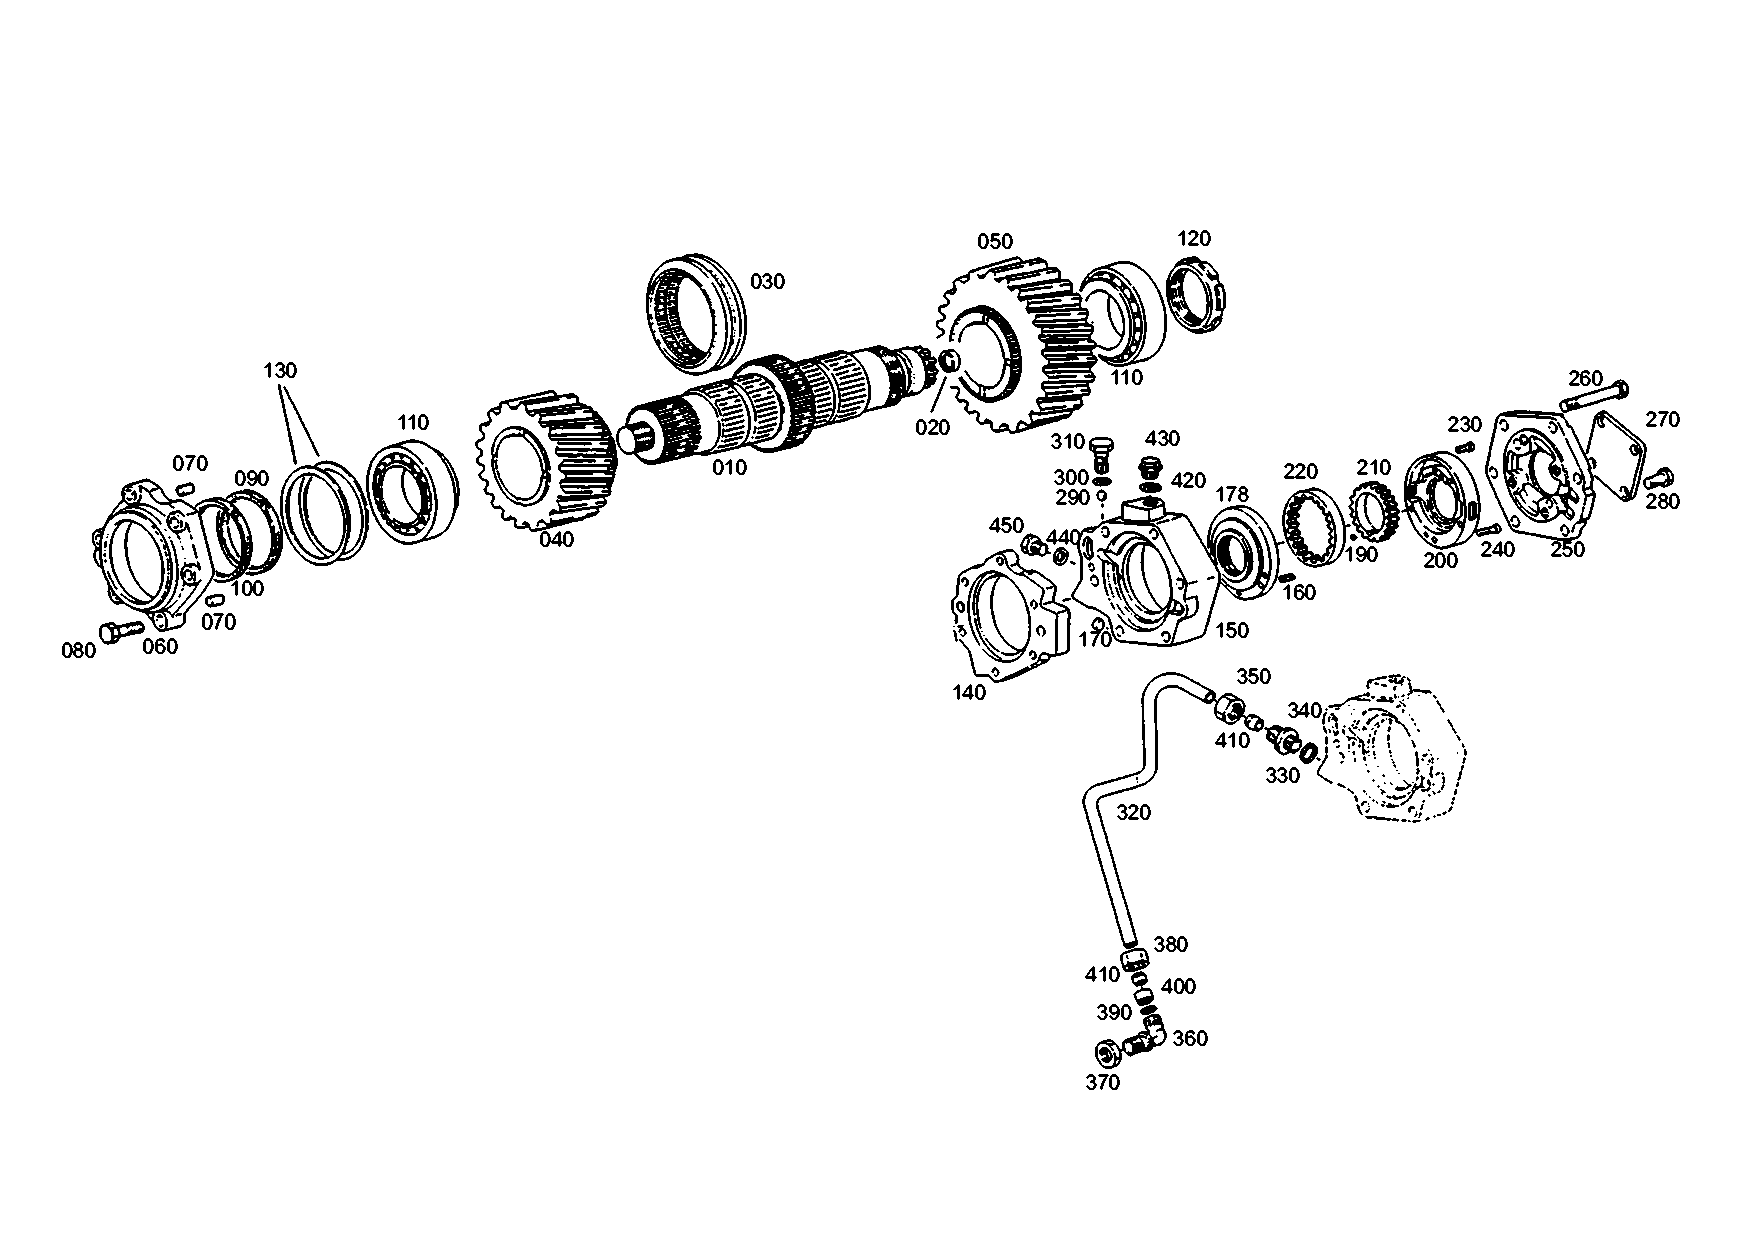 drawing for LUNA EQUIPOS INDUSTRIEALES, S.A. 171600220062 - INPUT GEAR (figure 4)